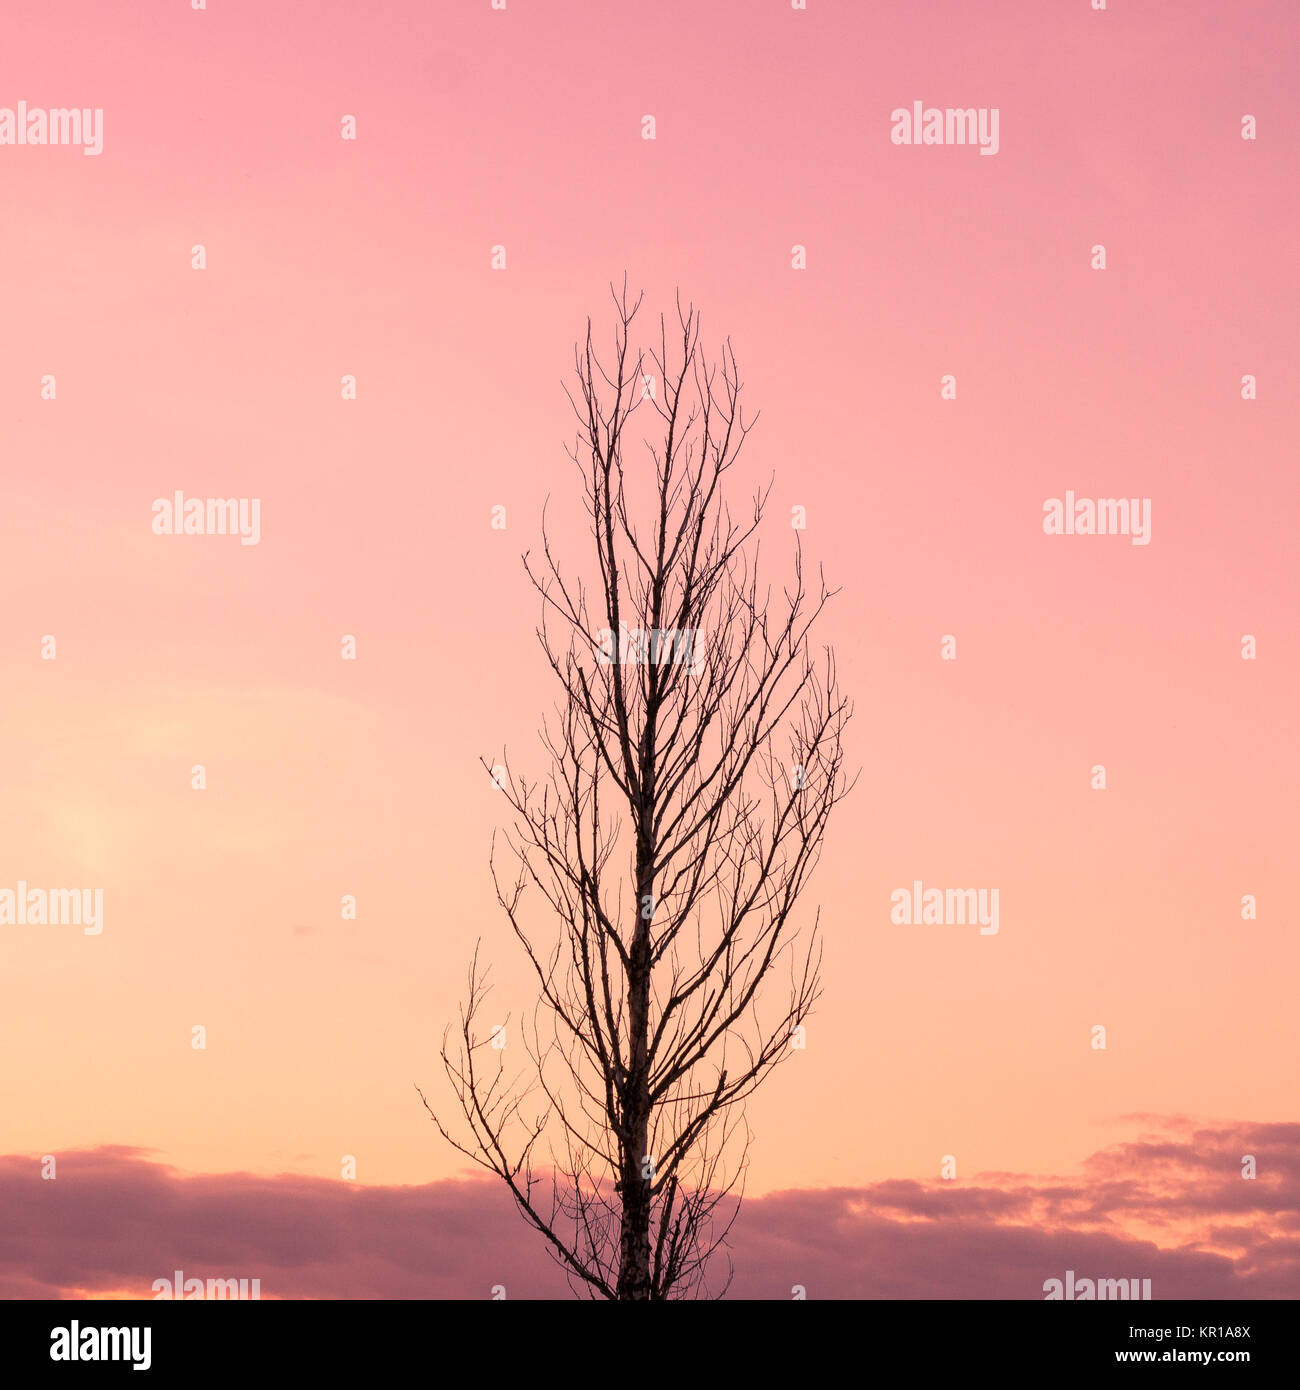 Treetop against a pink sky Stock Photo